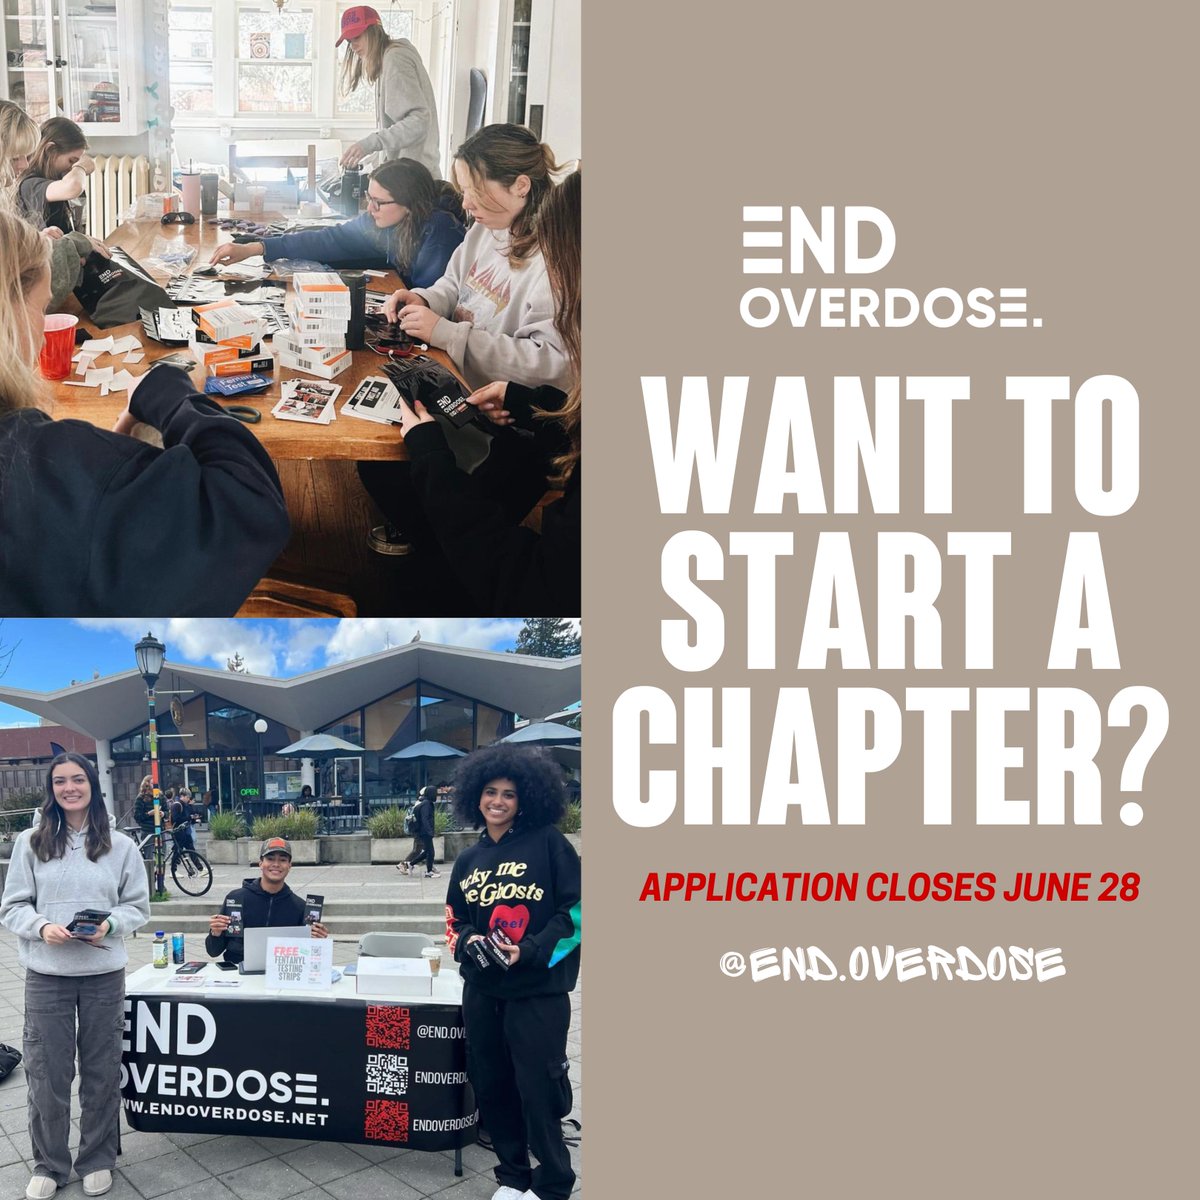 new chapter applications are still open! if you're affiliated with a college campus or want to start a chapter in your city, we want to hear from you! our peer-to-peer model is vital to reaching people across the country. 🫡 apply here through june 28th: docs.google.com/forms/d/e/1FAI…